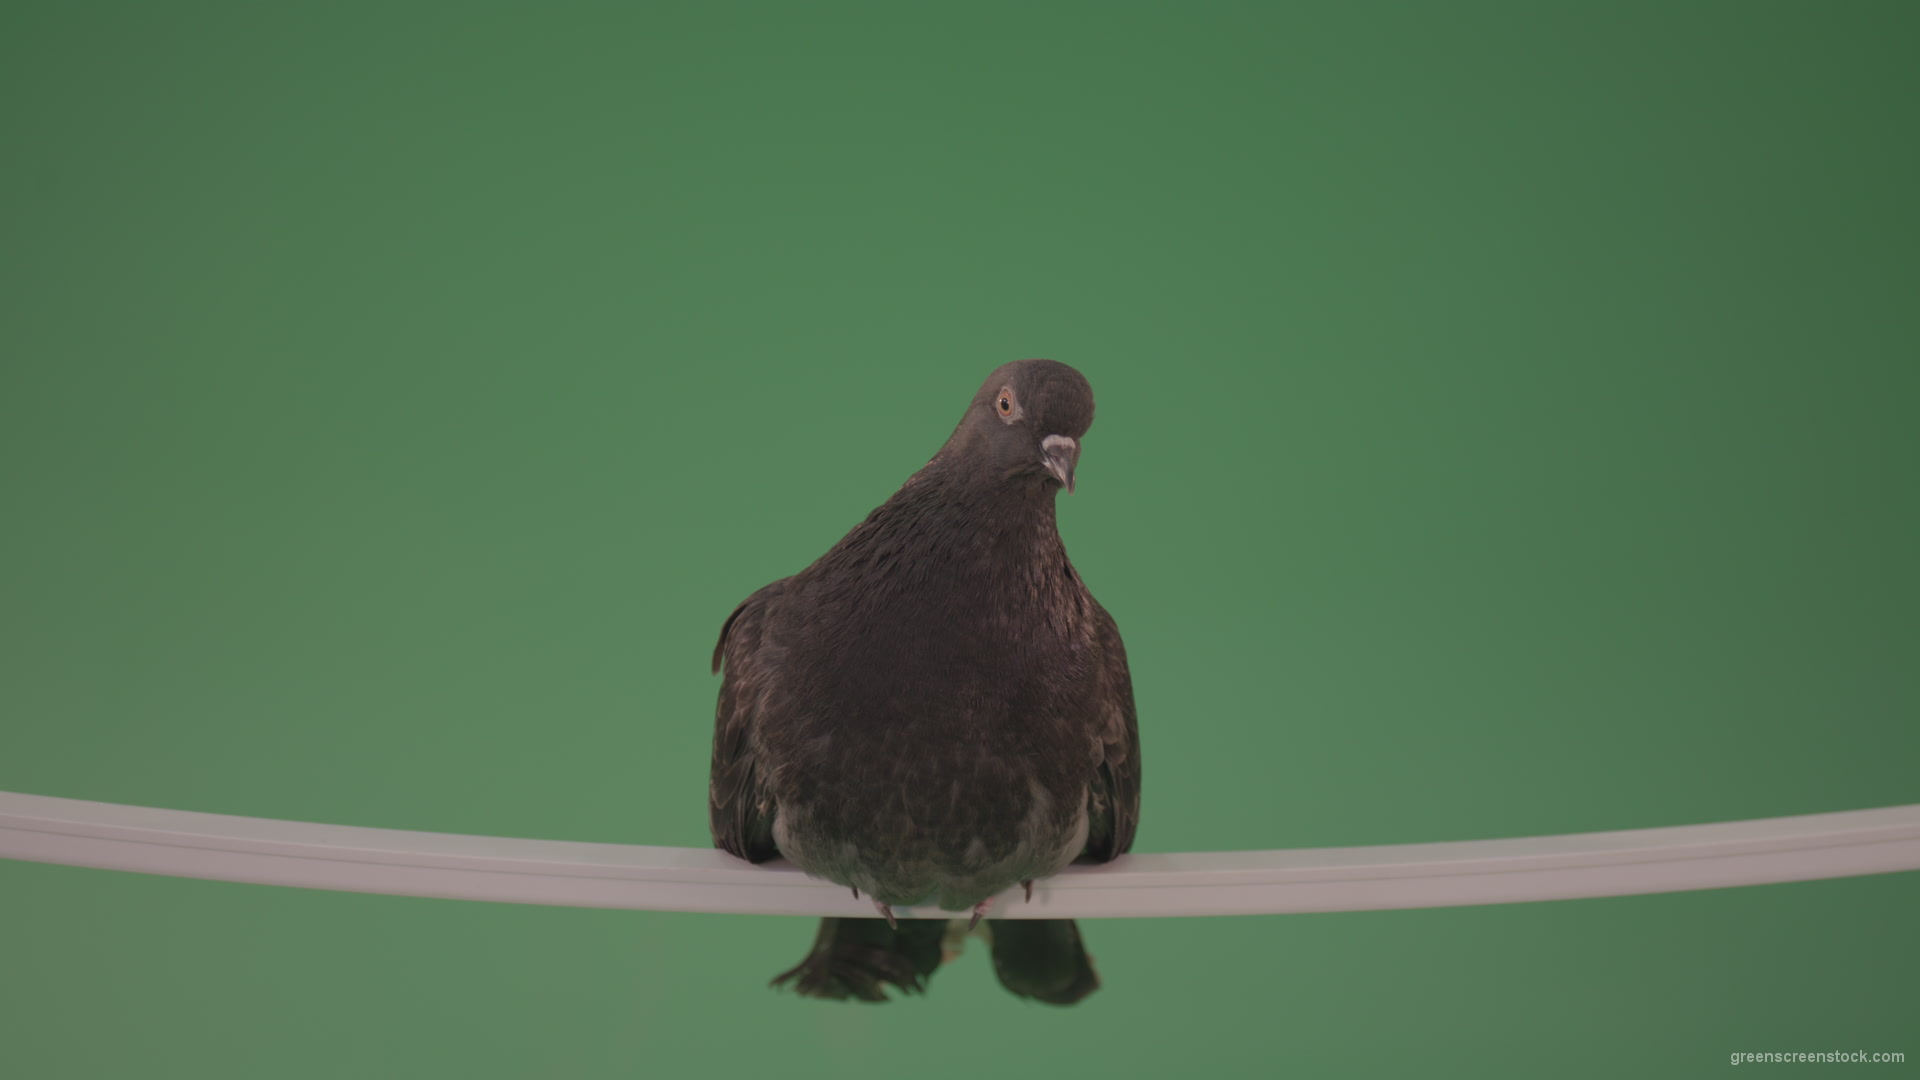 Gray-wild-bird-doves-sitting-on-a-branch-in-the-city-isolated-in-green-screen-studio_007 Green Screen Stock